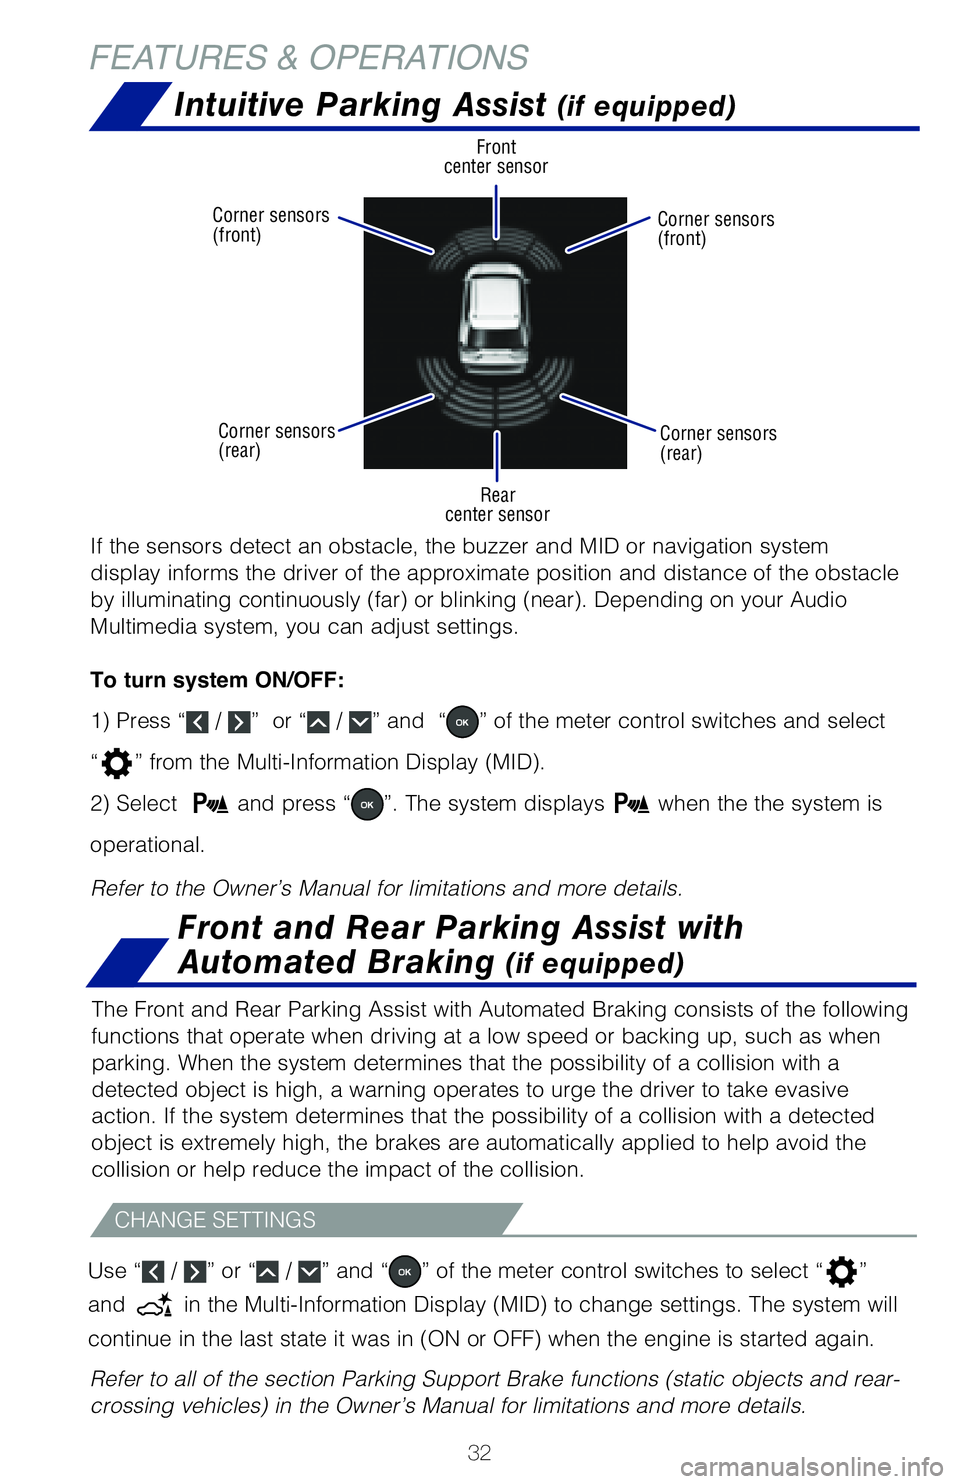 TOYOTA RAV4 HYBRID 2020  Owners Manual (in English) 32
FEATURES & OPERATIONS
If the sensors detect an obstacle, the buzzer and MID or navigation syst\
em 
display informs the driver of the approximate position and distance of t\
he obstacle 
�C�Z��J�M